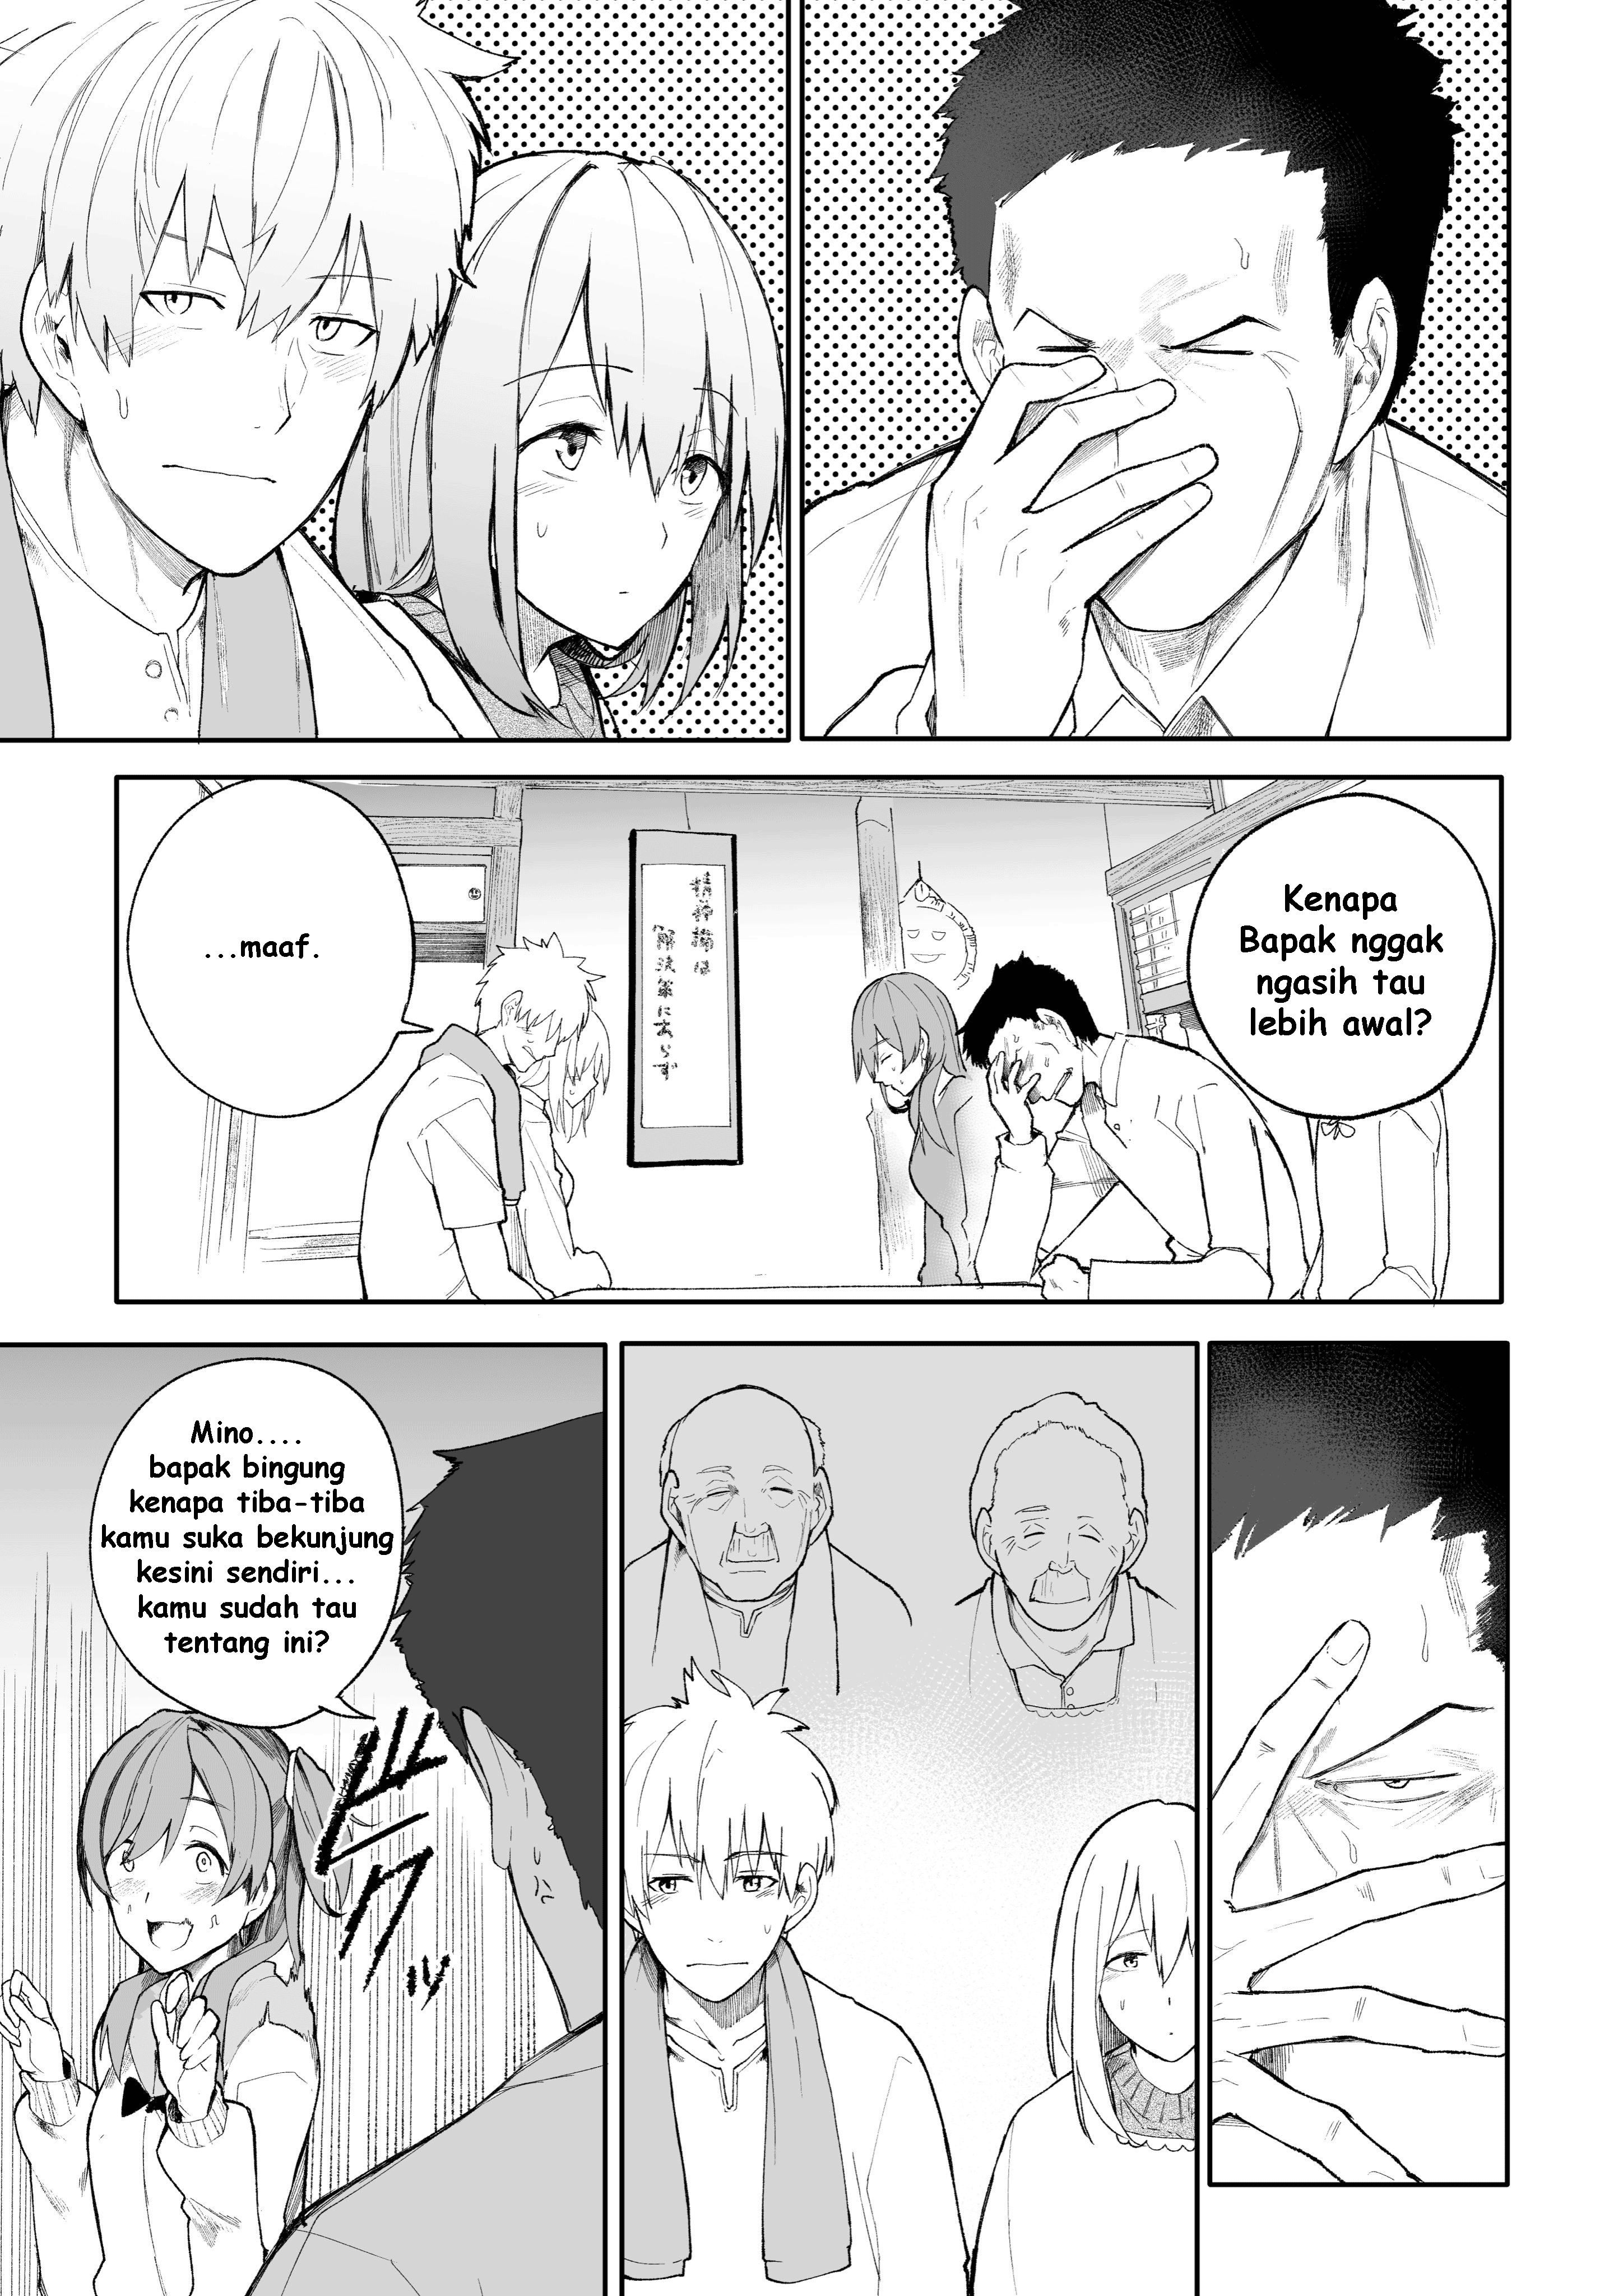 A Story About A Grampa and Granma Returned Back to their Youth Chapter 06 2